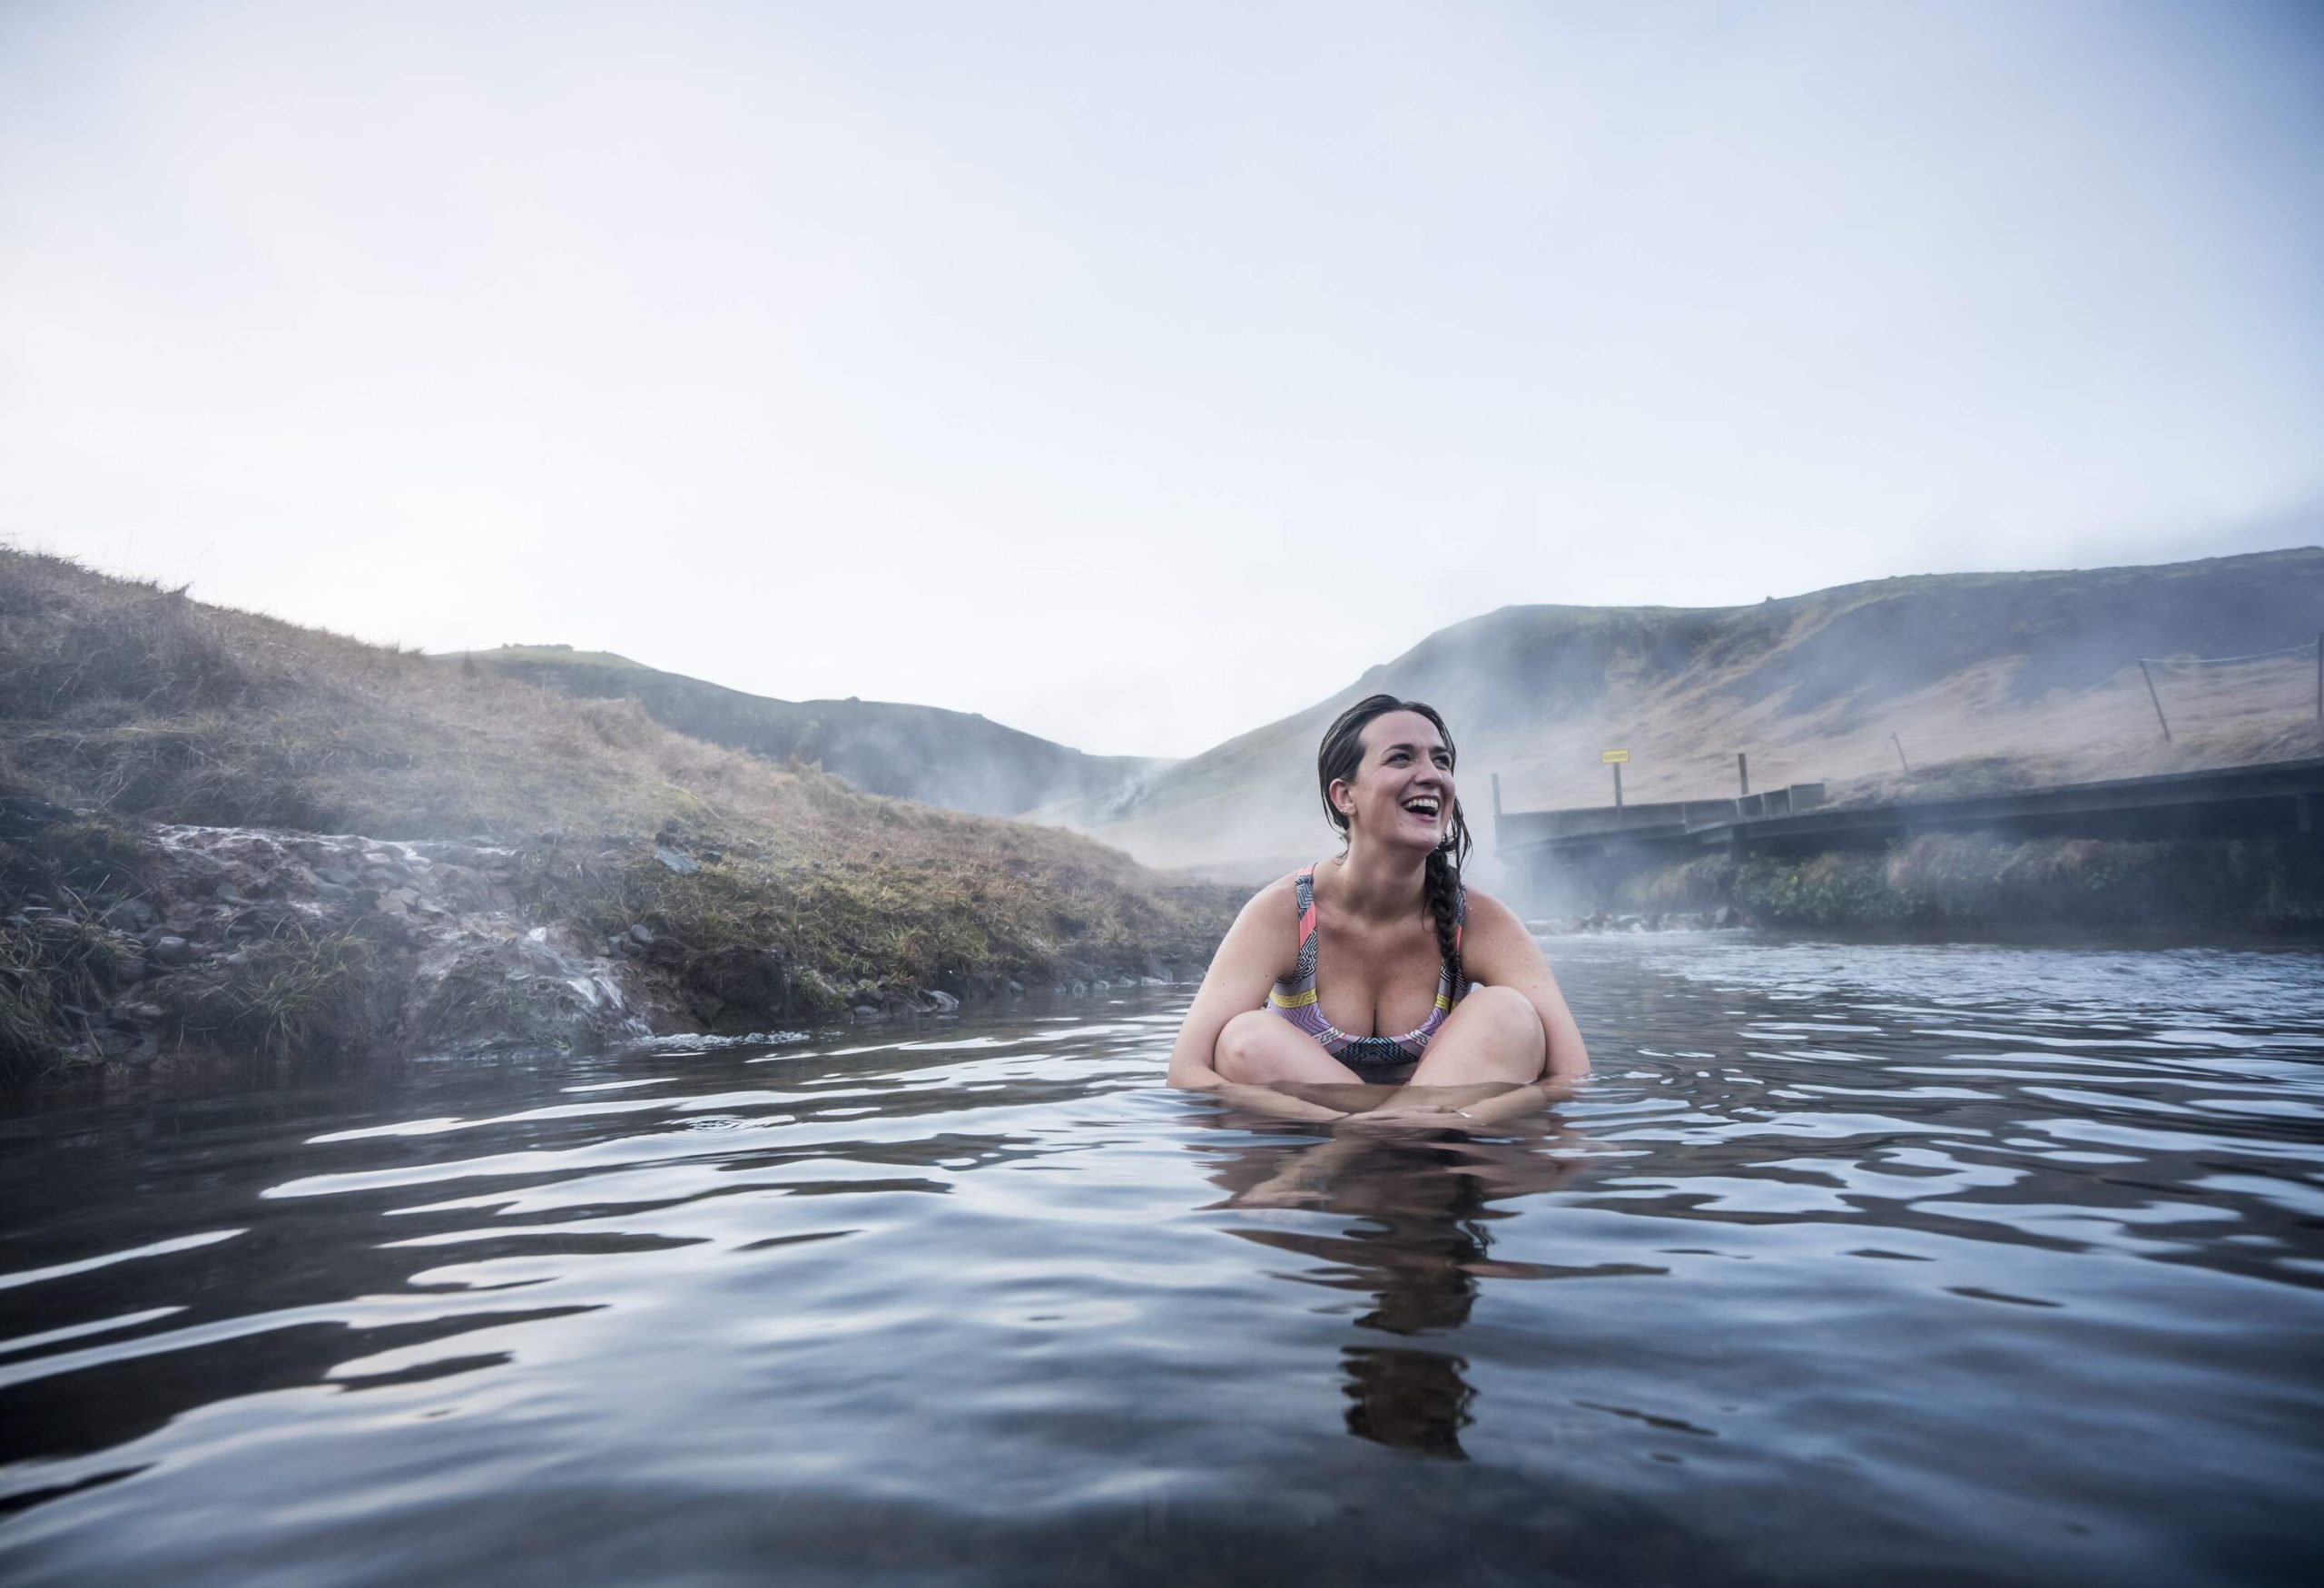 dest_iceland_people_woman_hot_spring_lagoon_gettyimages-1146669985_universal_within-usage-period_92319